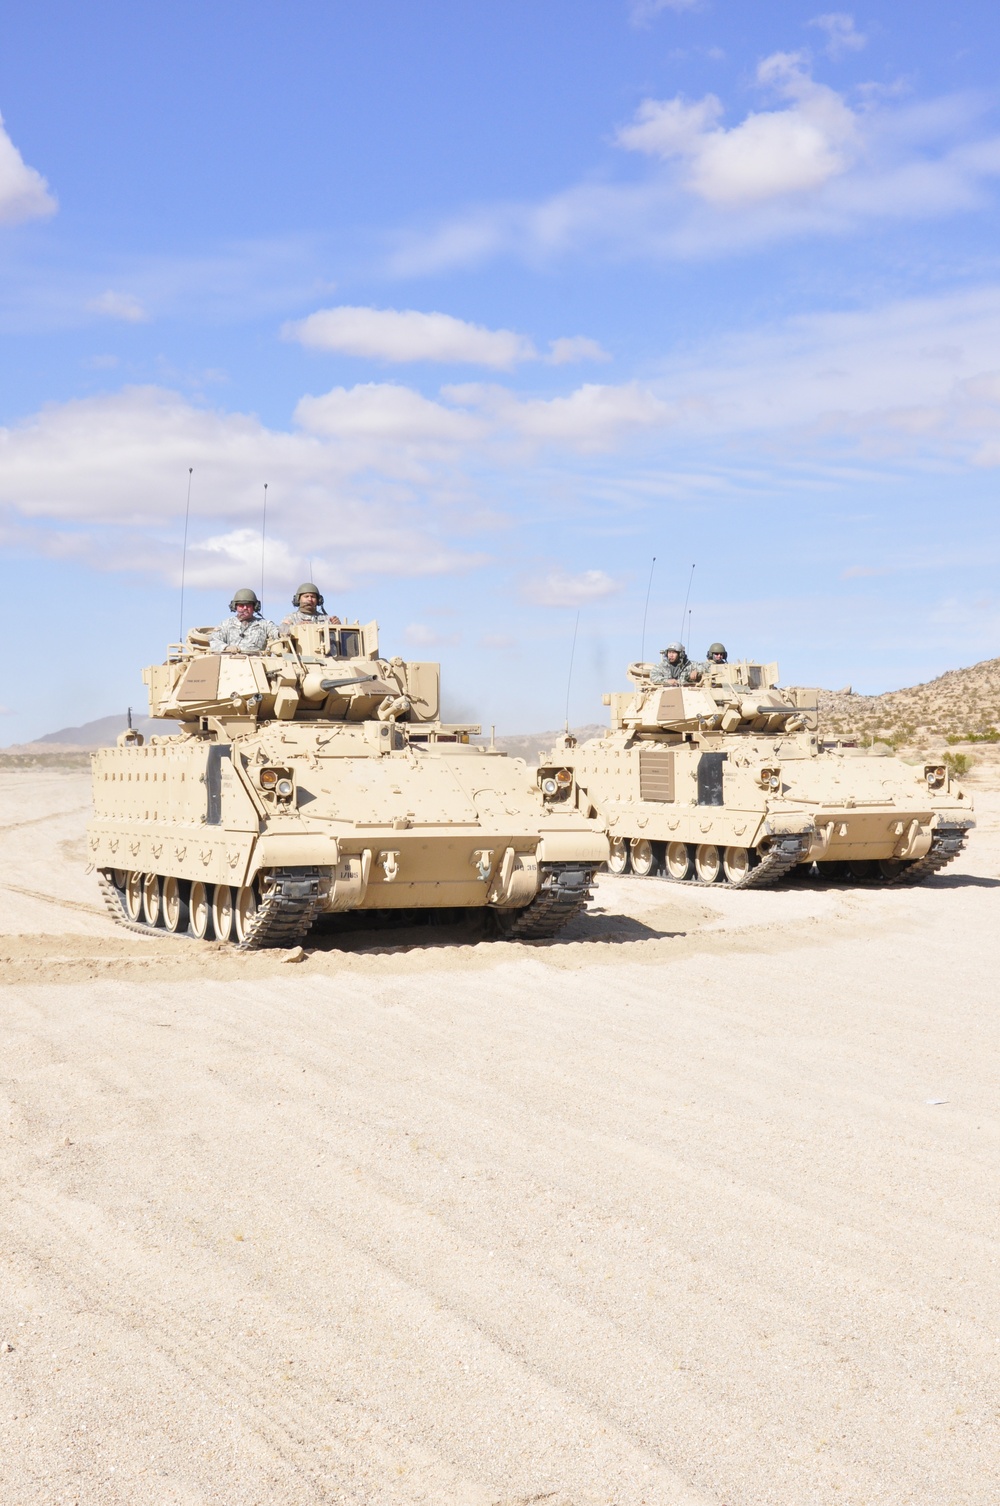 California's only National Guard armored unit displays their might during maneuvers at Fort Irwin's National Training Center